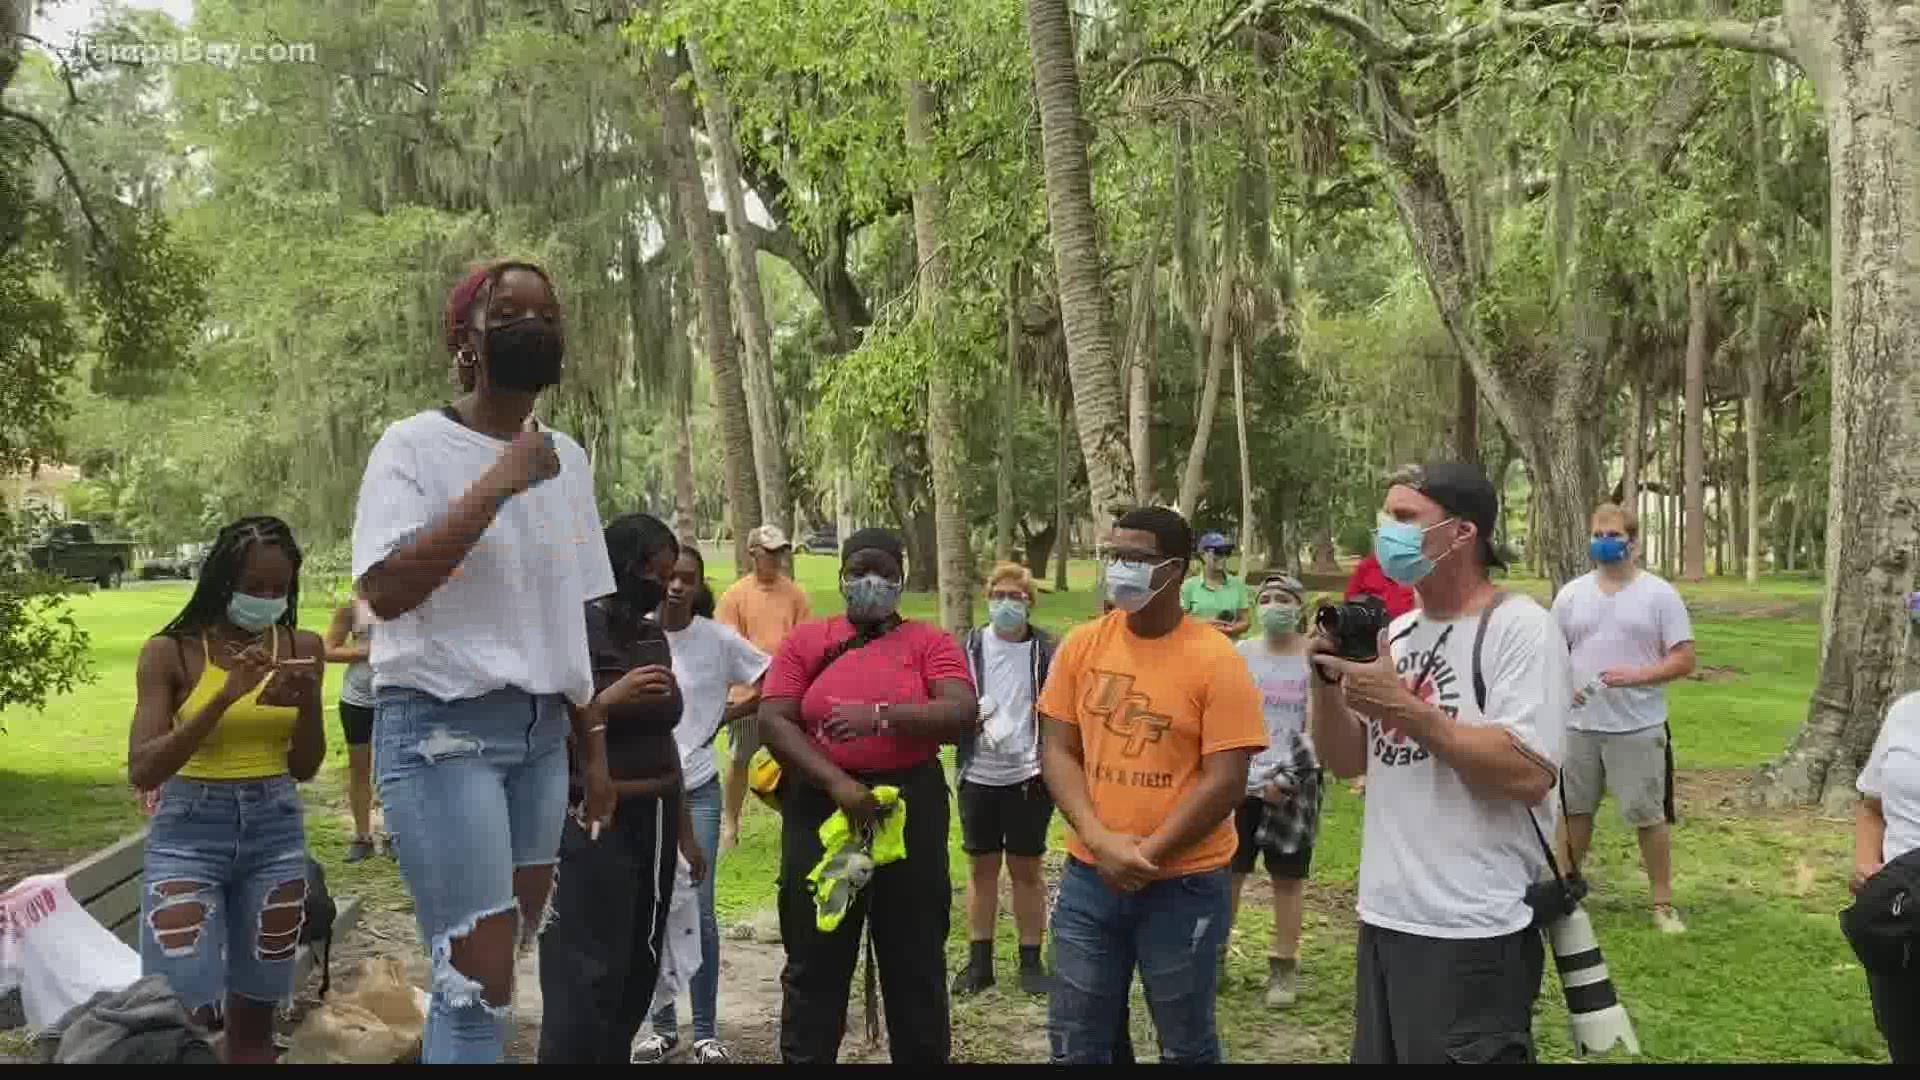 Tampa Bay area protesters gathered Saturday calling for social justice following the police shooting of Jacob Blake.